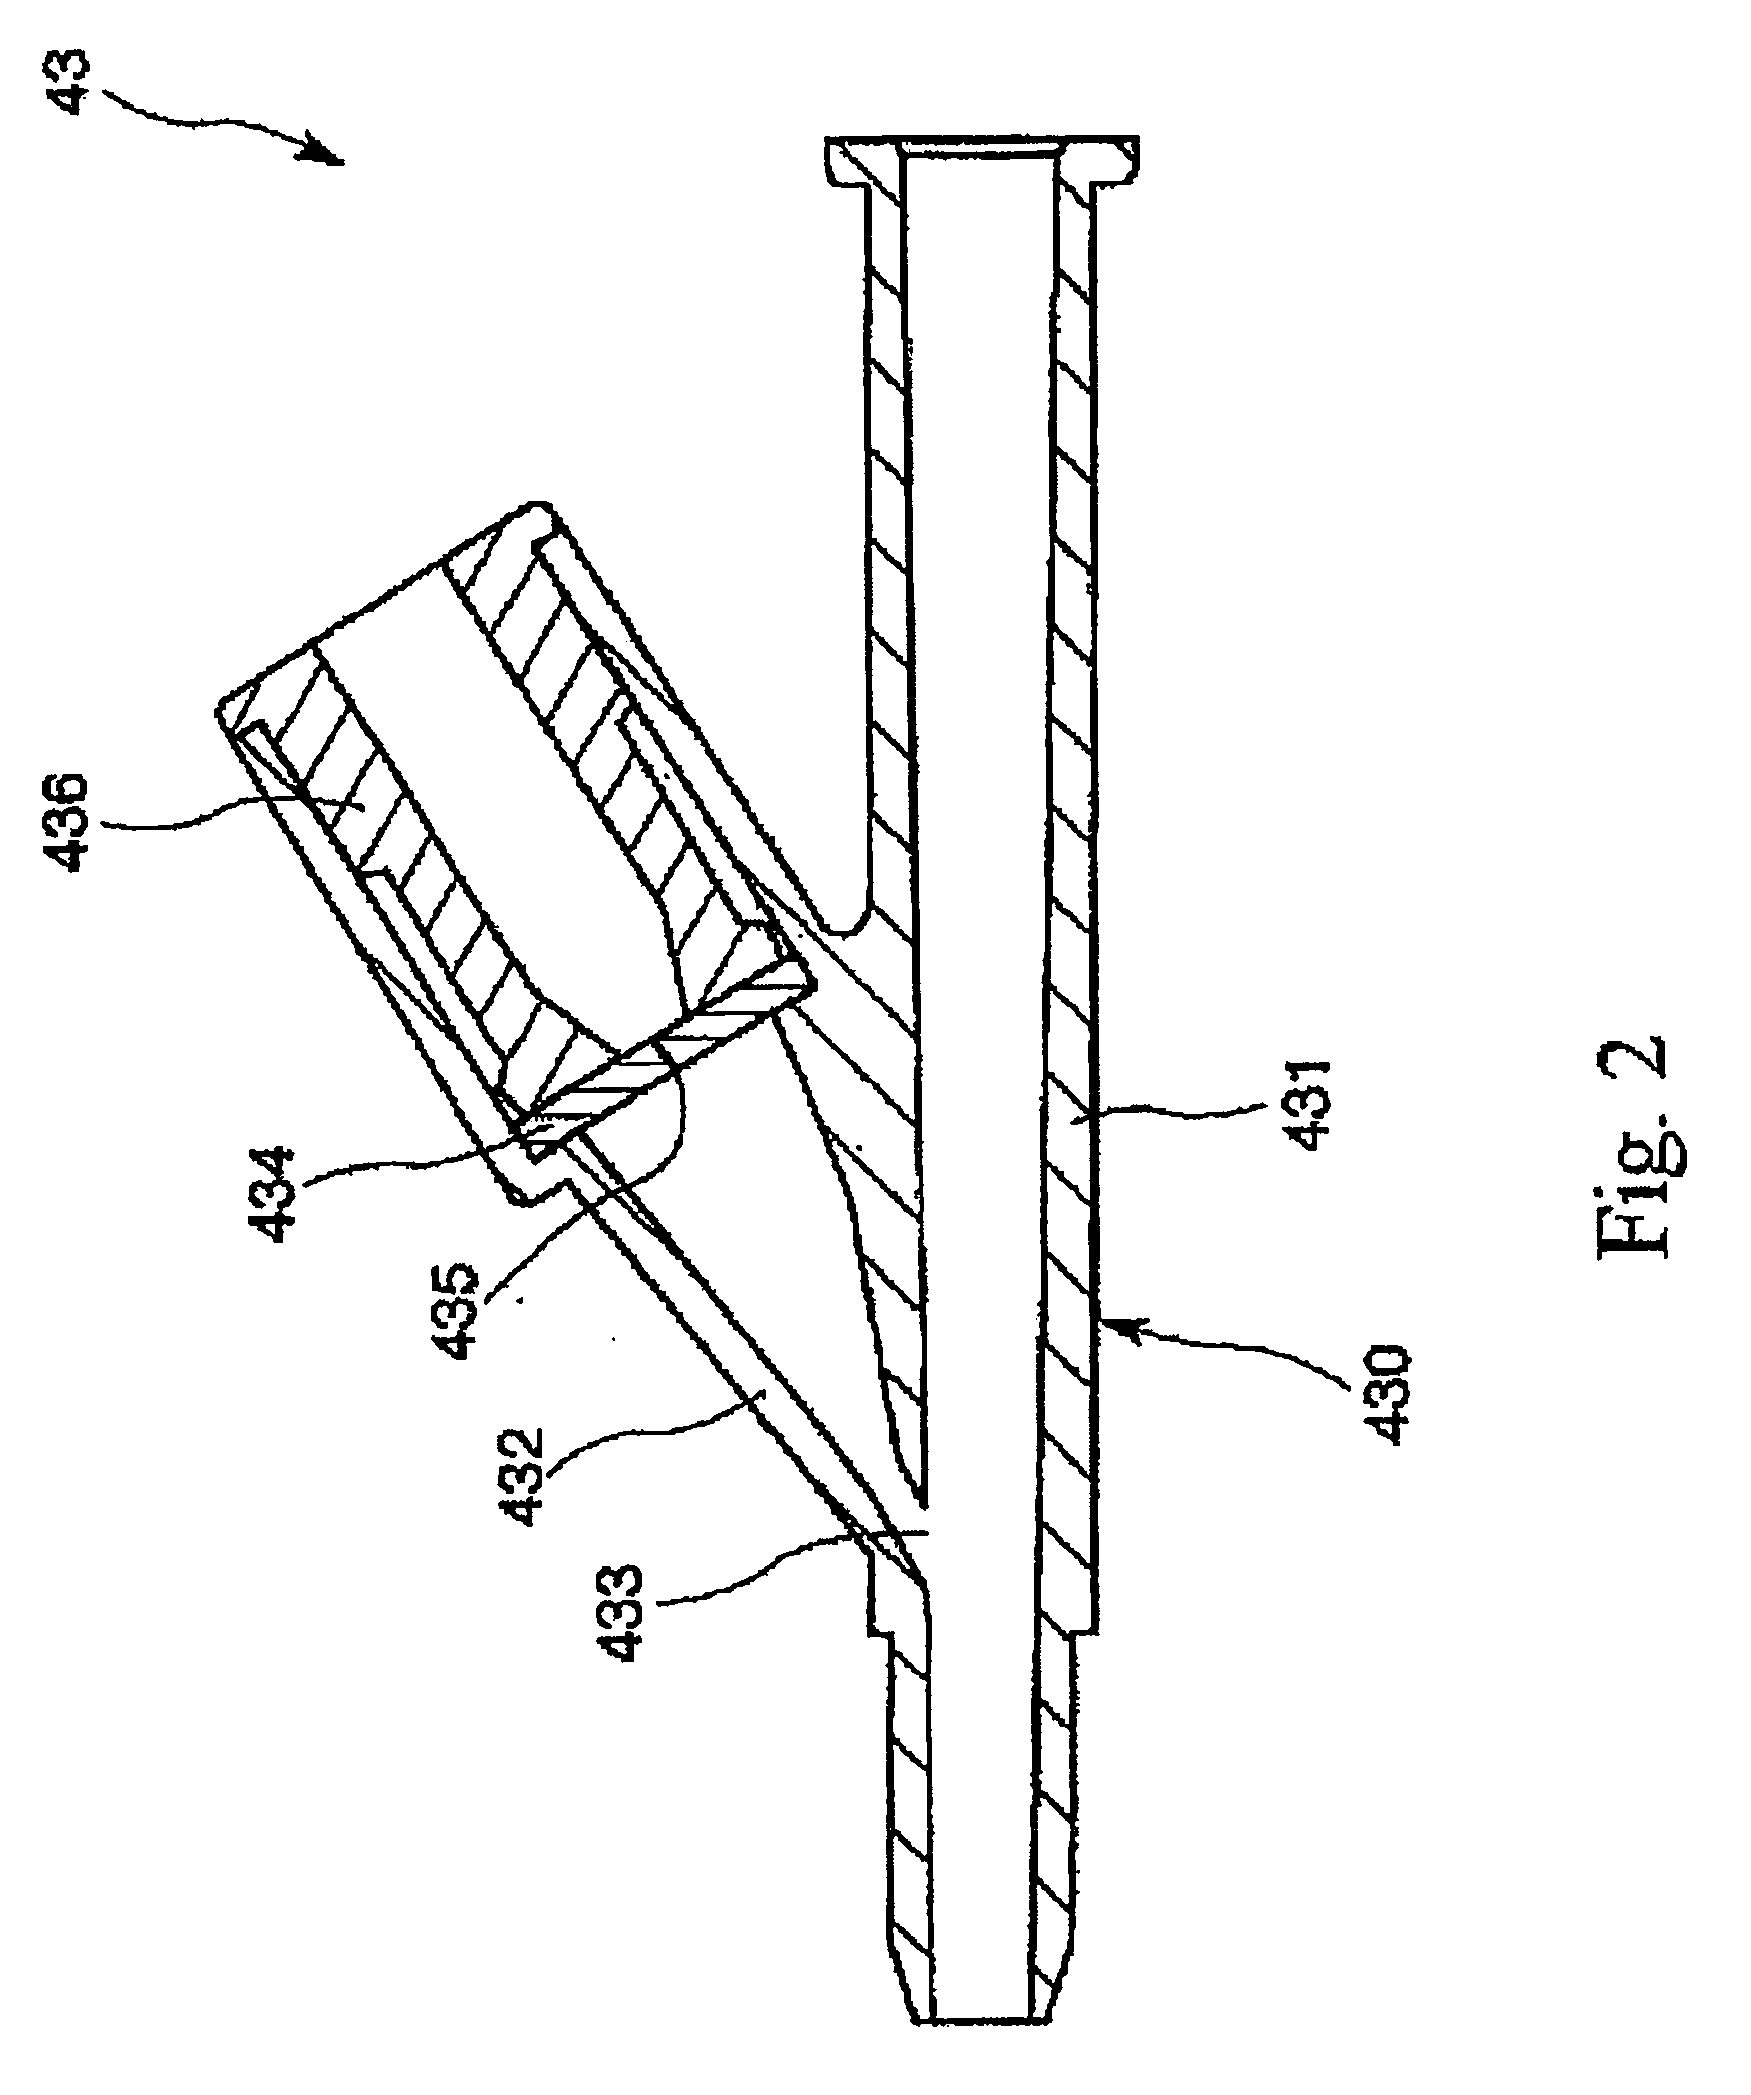 Guide wire assembly